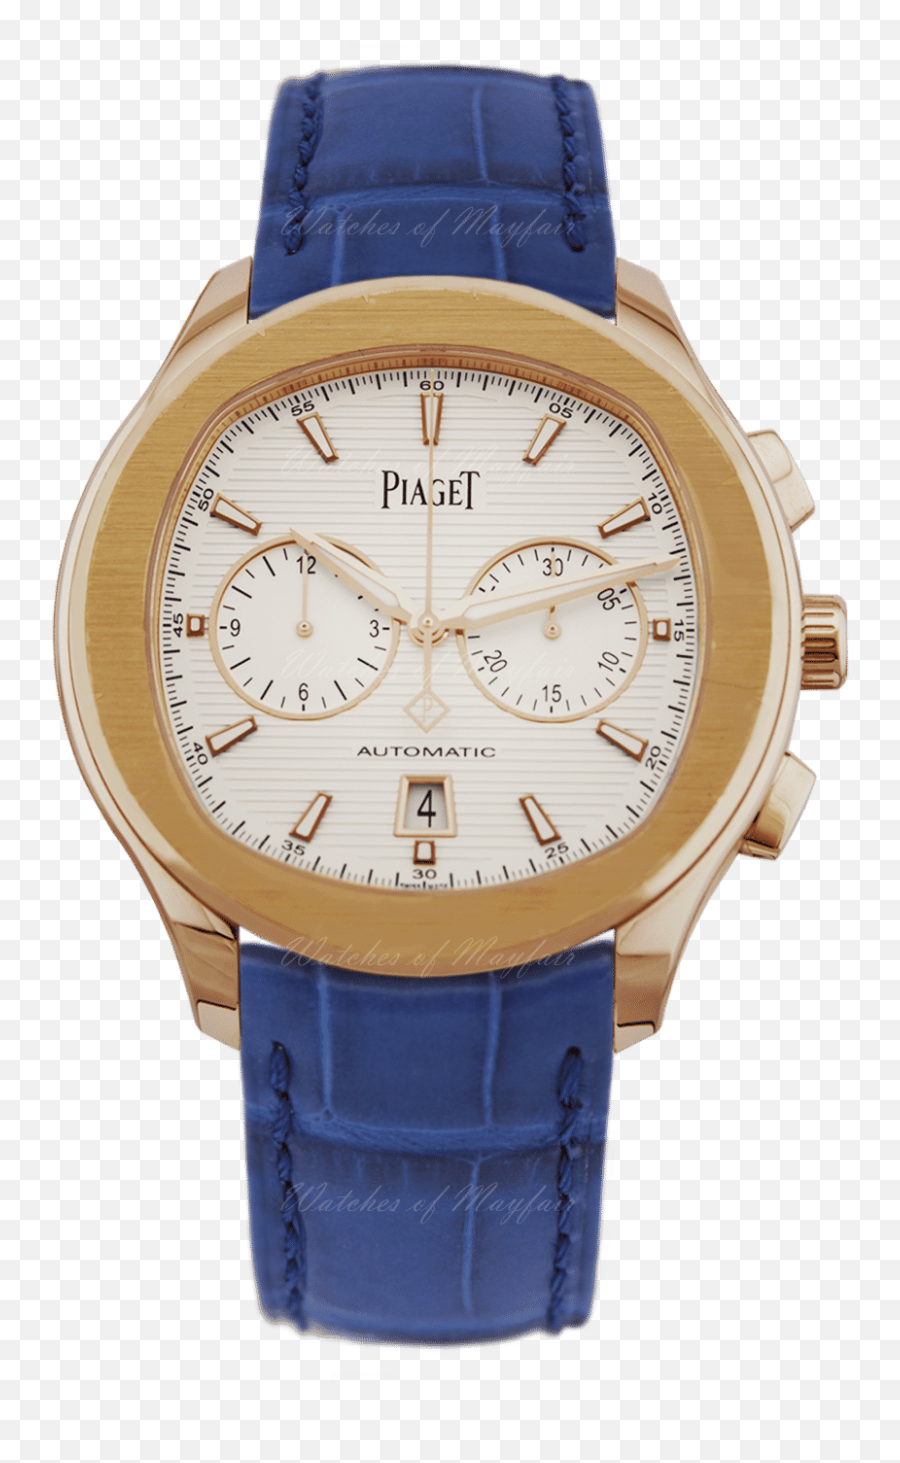 Piaget Watch Repairs U0026 Battery Replacement Repairs By Post Emoji,Strapping Emotions